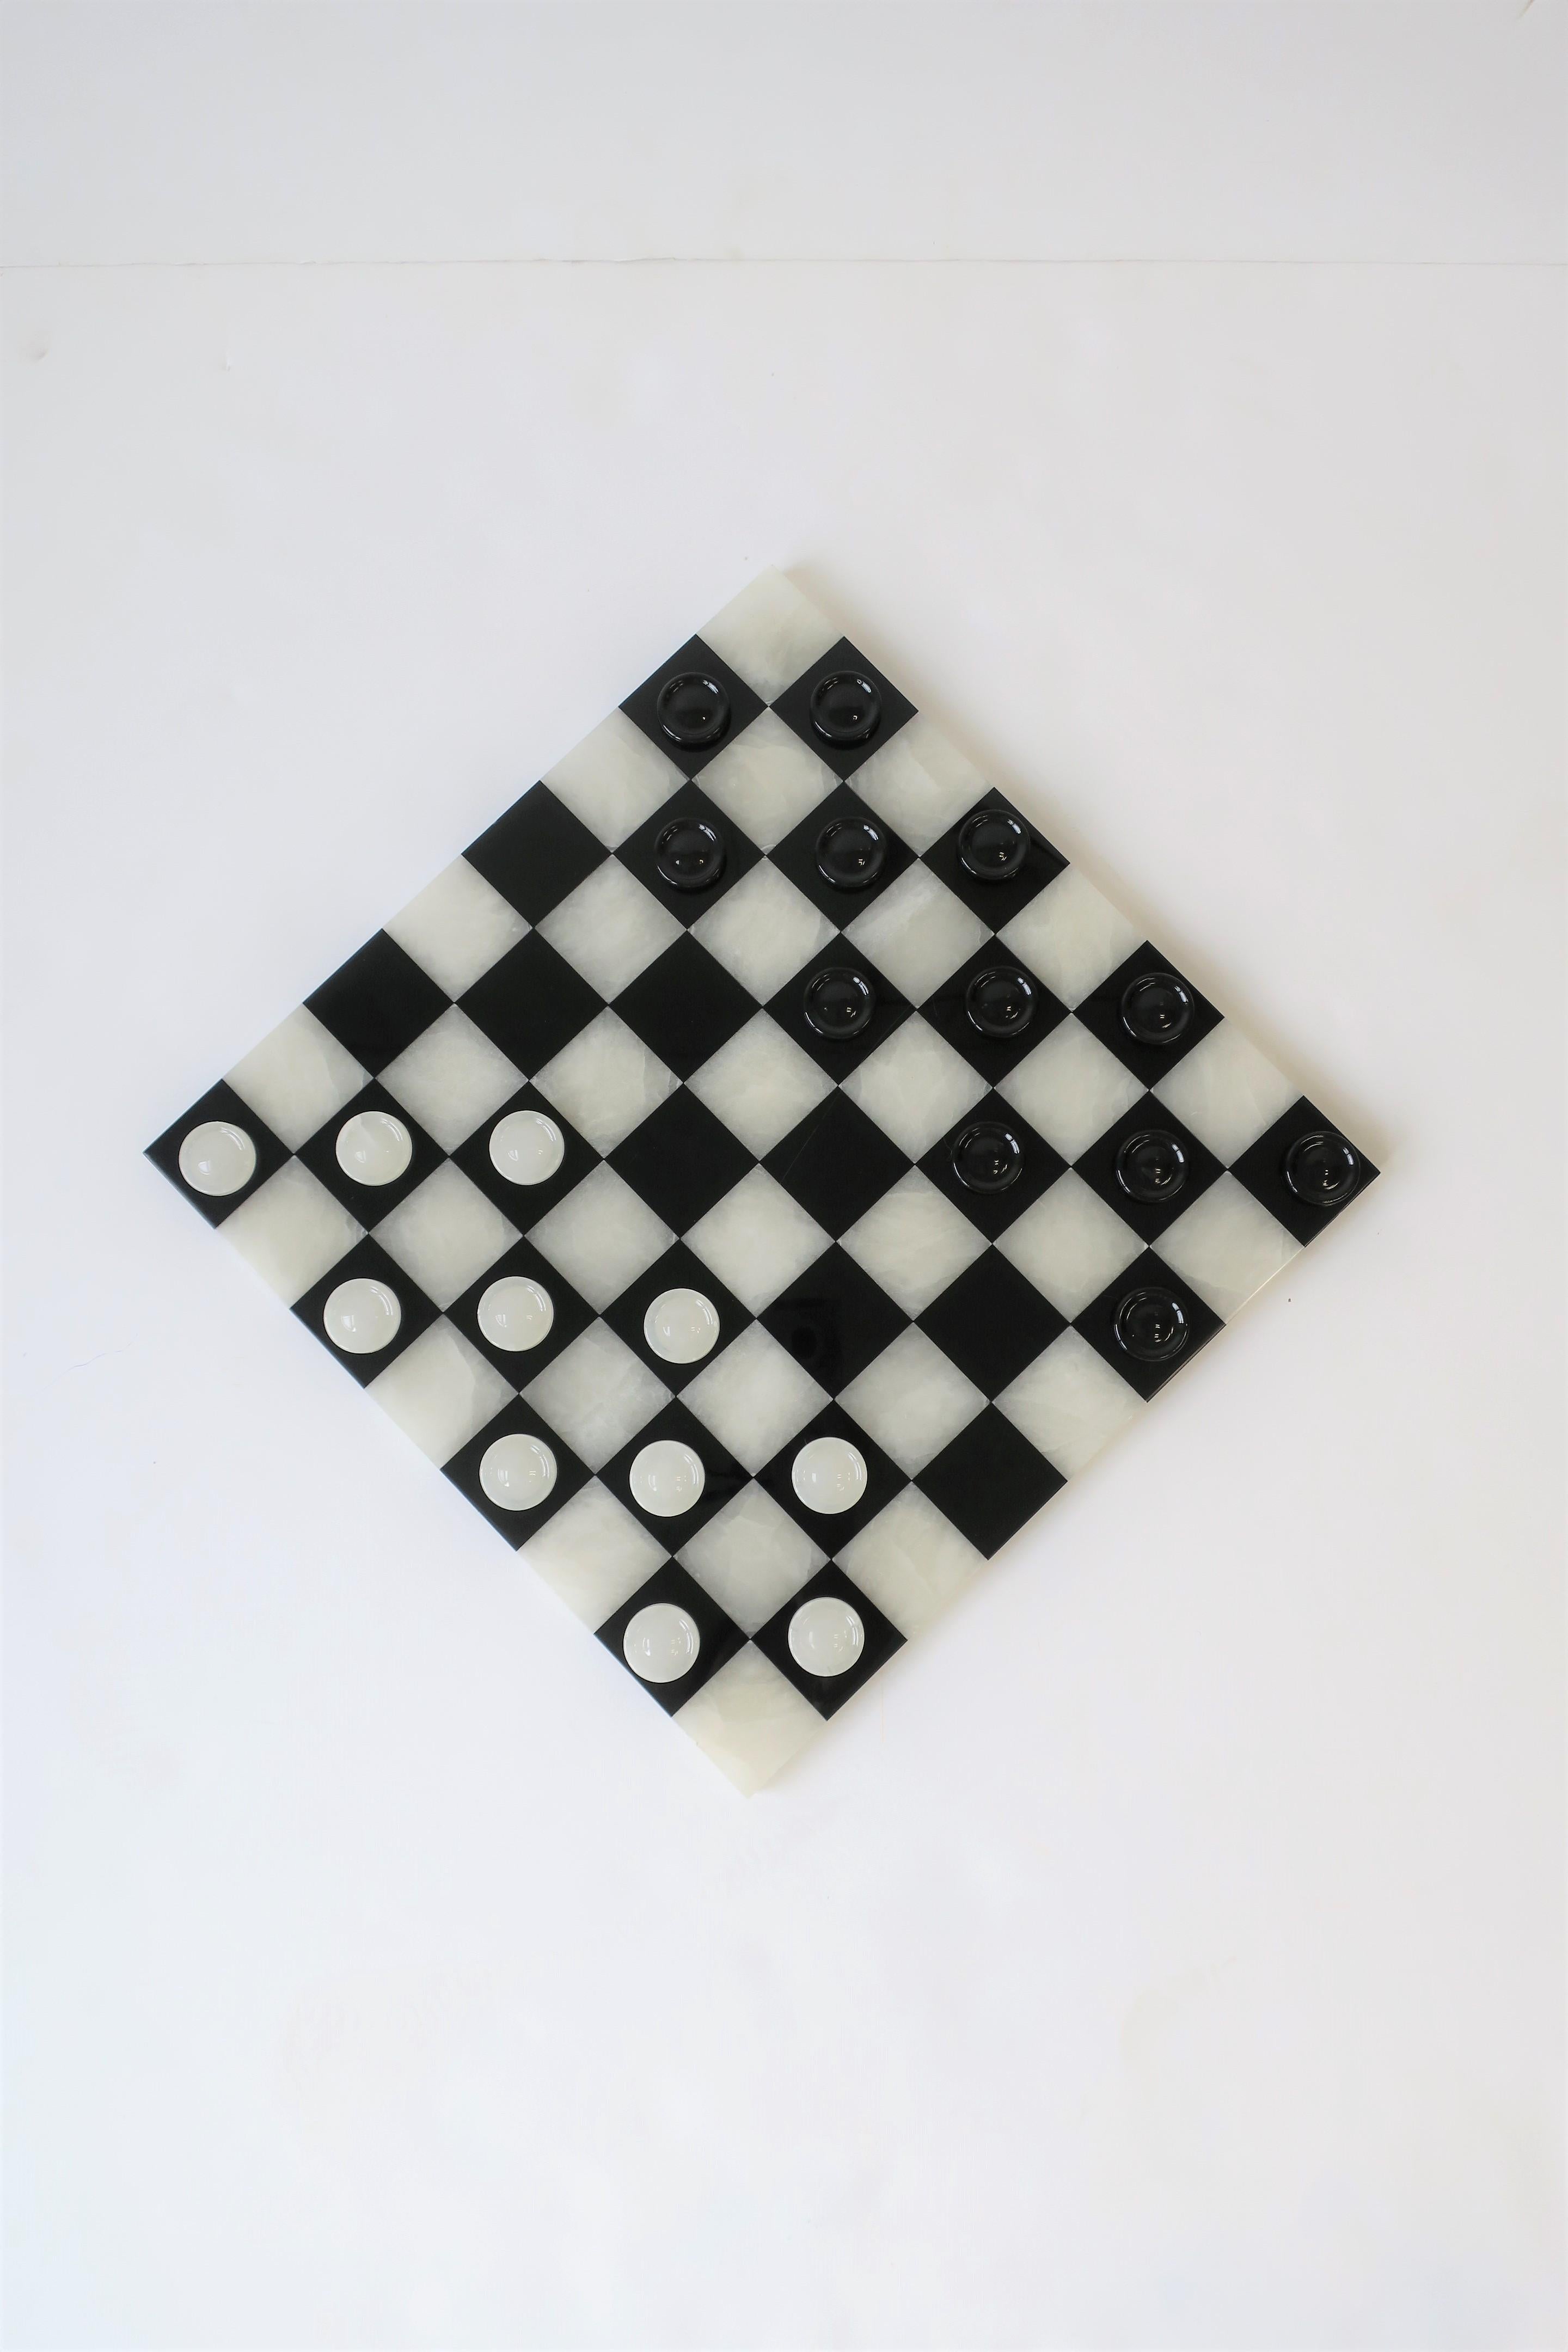 Black and White Onyx and Acrylic Chess and Tic-Tac-Toe Set Game Set 3